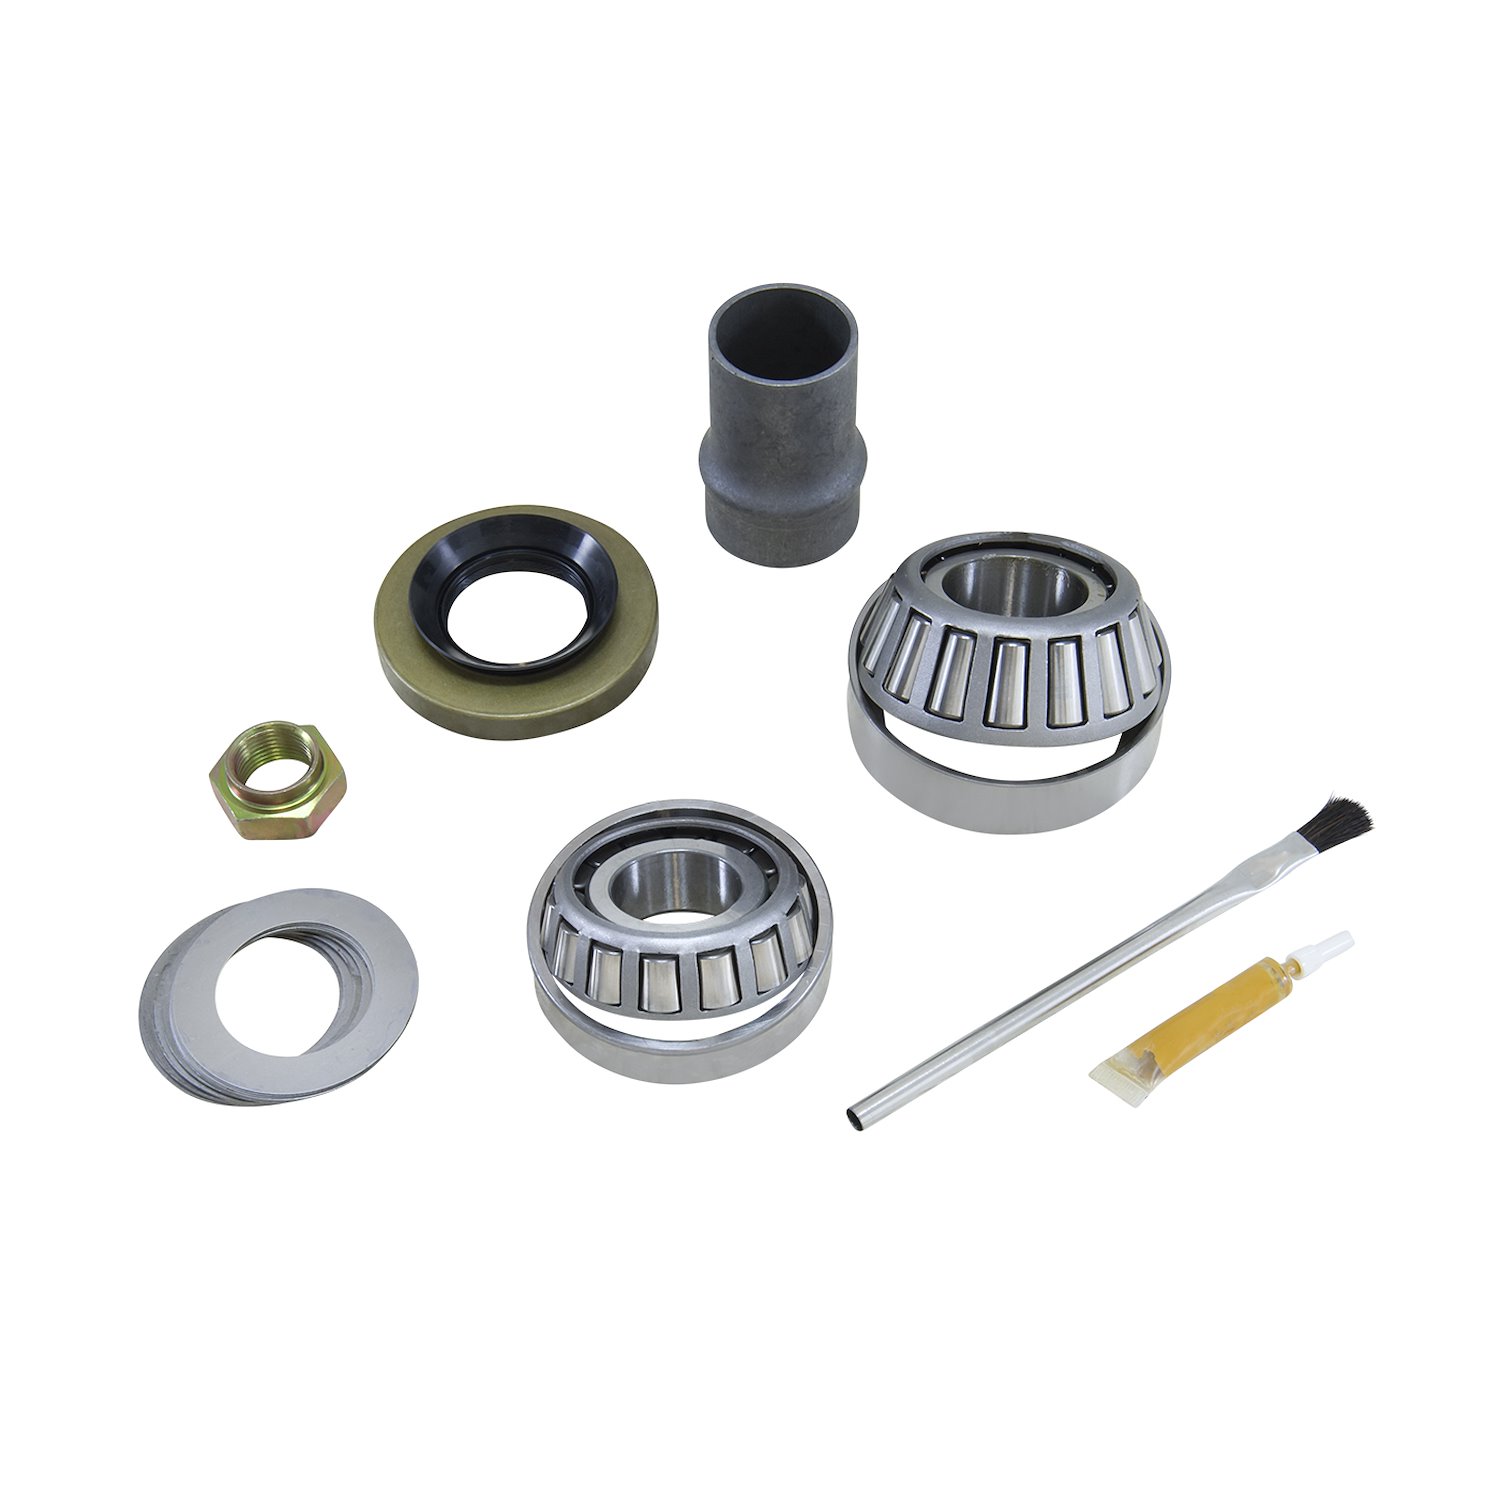 Pinion Install Kit For '91-'97 Toyota Landcruiser Reverse Rotation Front